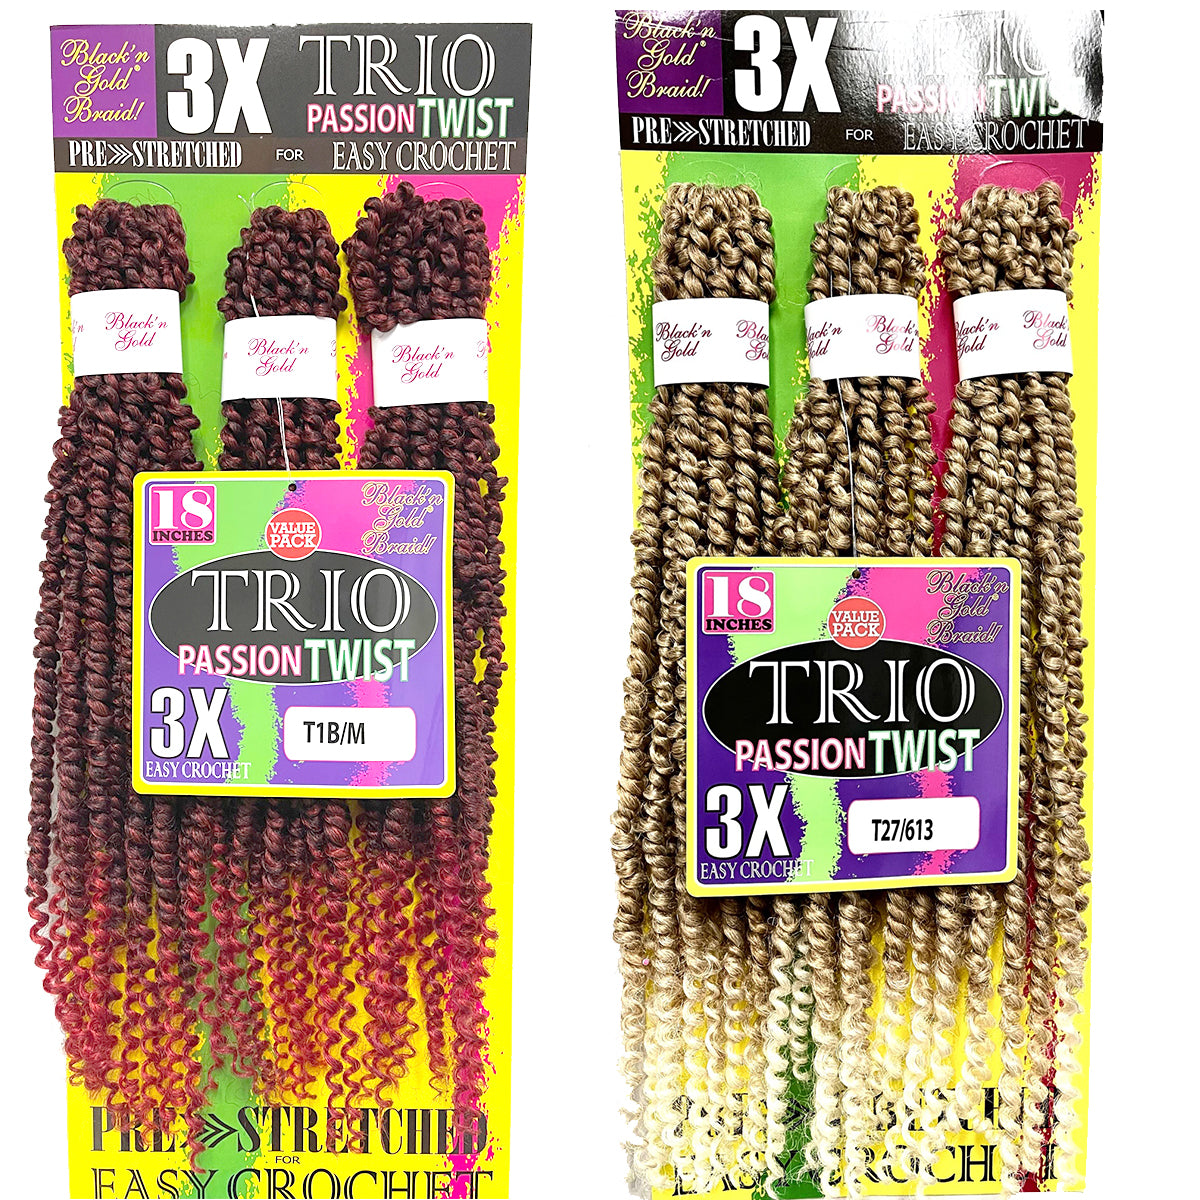 BNG 3X TRIO Passion Twist 18 for Crochet Braiding – BNGHAIR